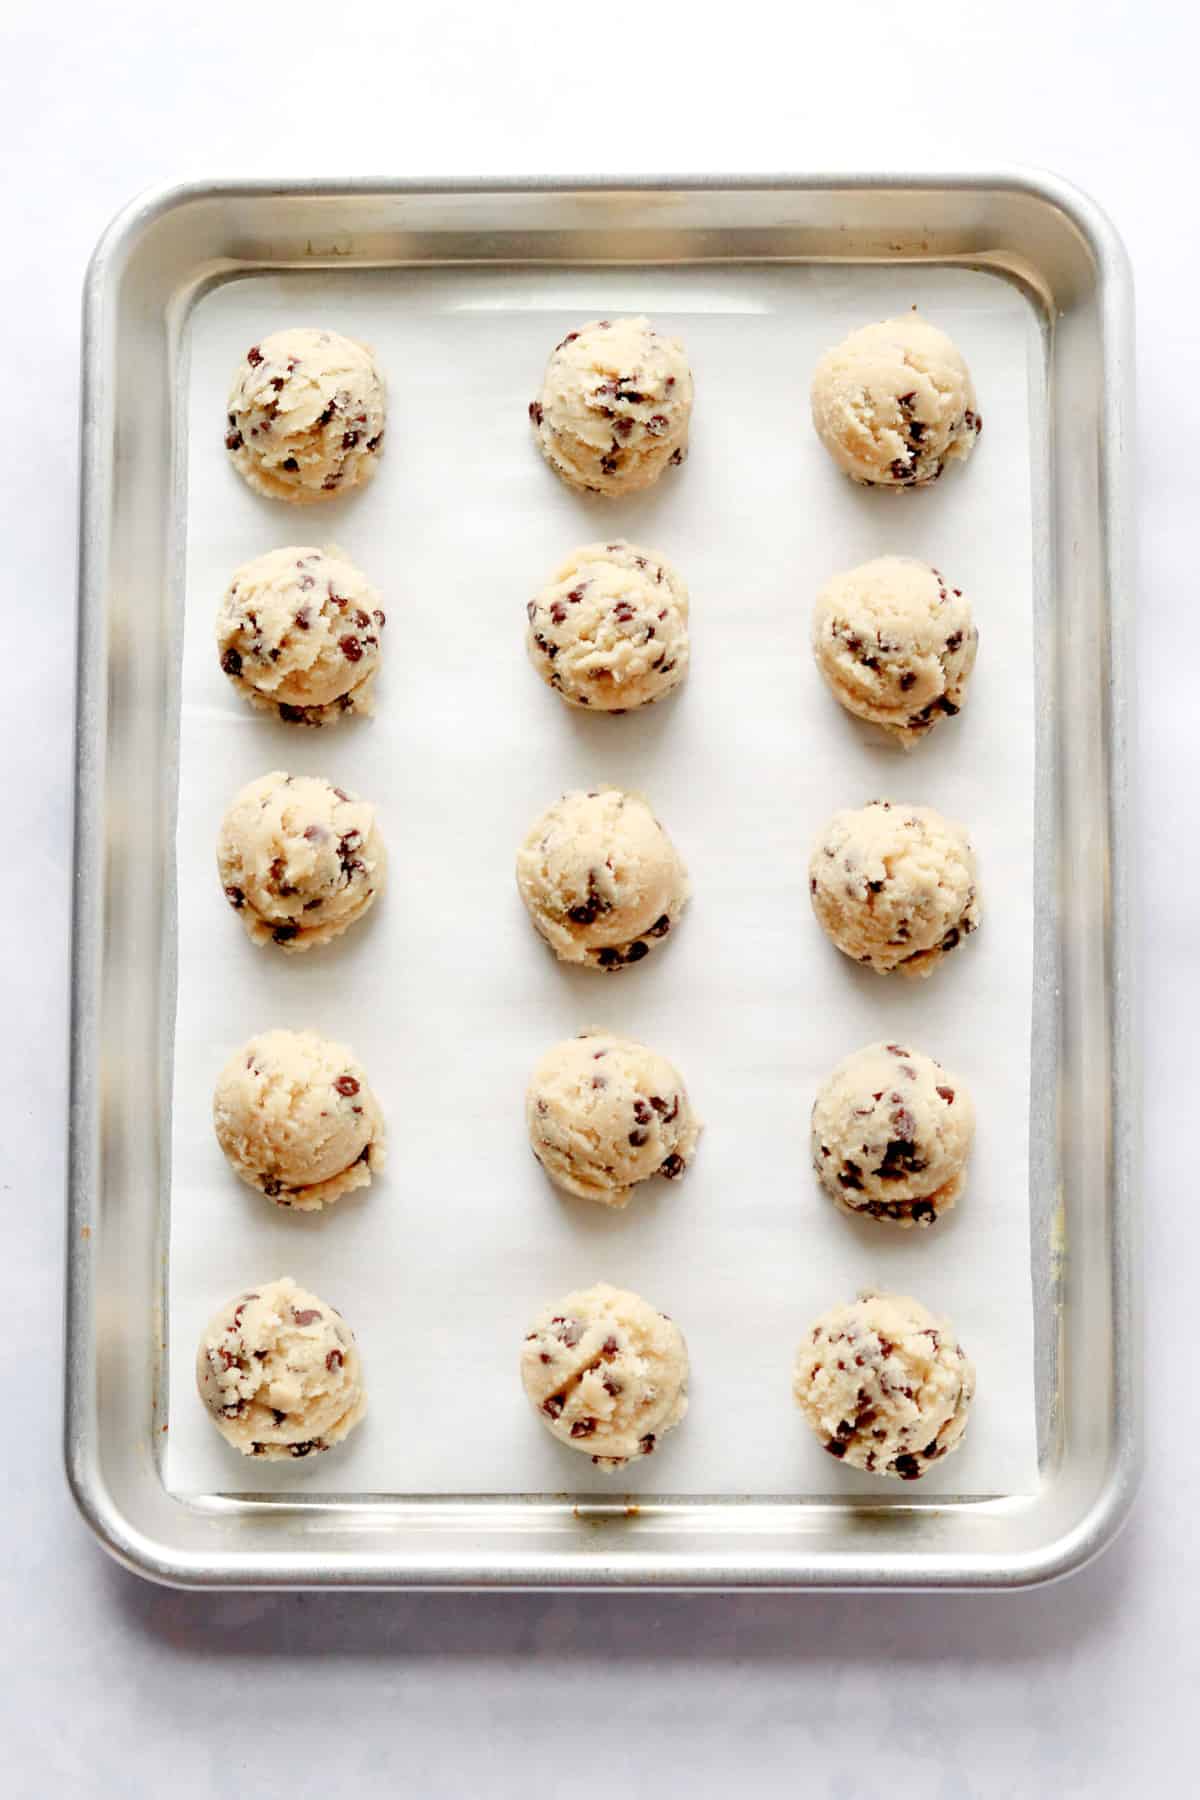 A rimmed baking sheet lined with parchment paper and topped with keto chocolate chip cookie dough bites